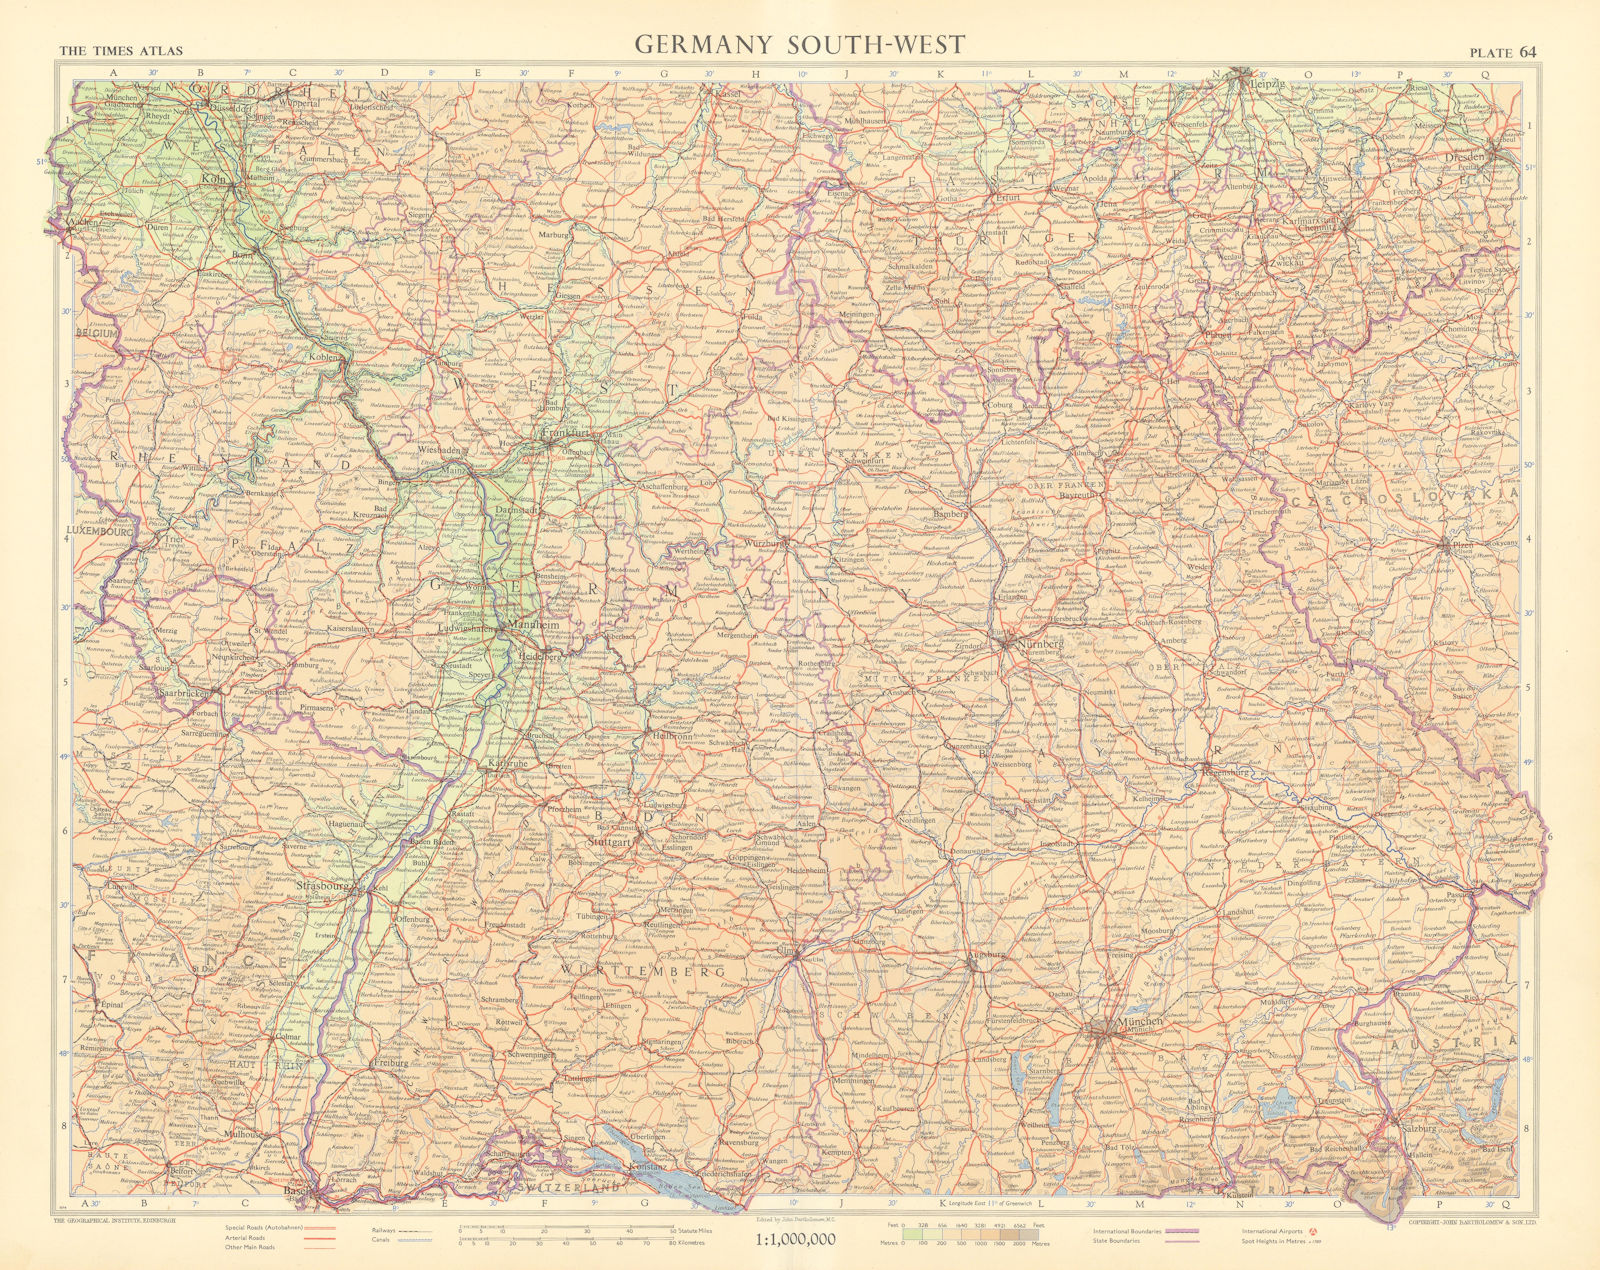 Associate Product Germany south-west. Bavaria Bayern & Baden-Wurttemberg. TIMES 1955 old map